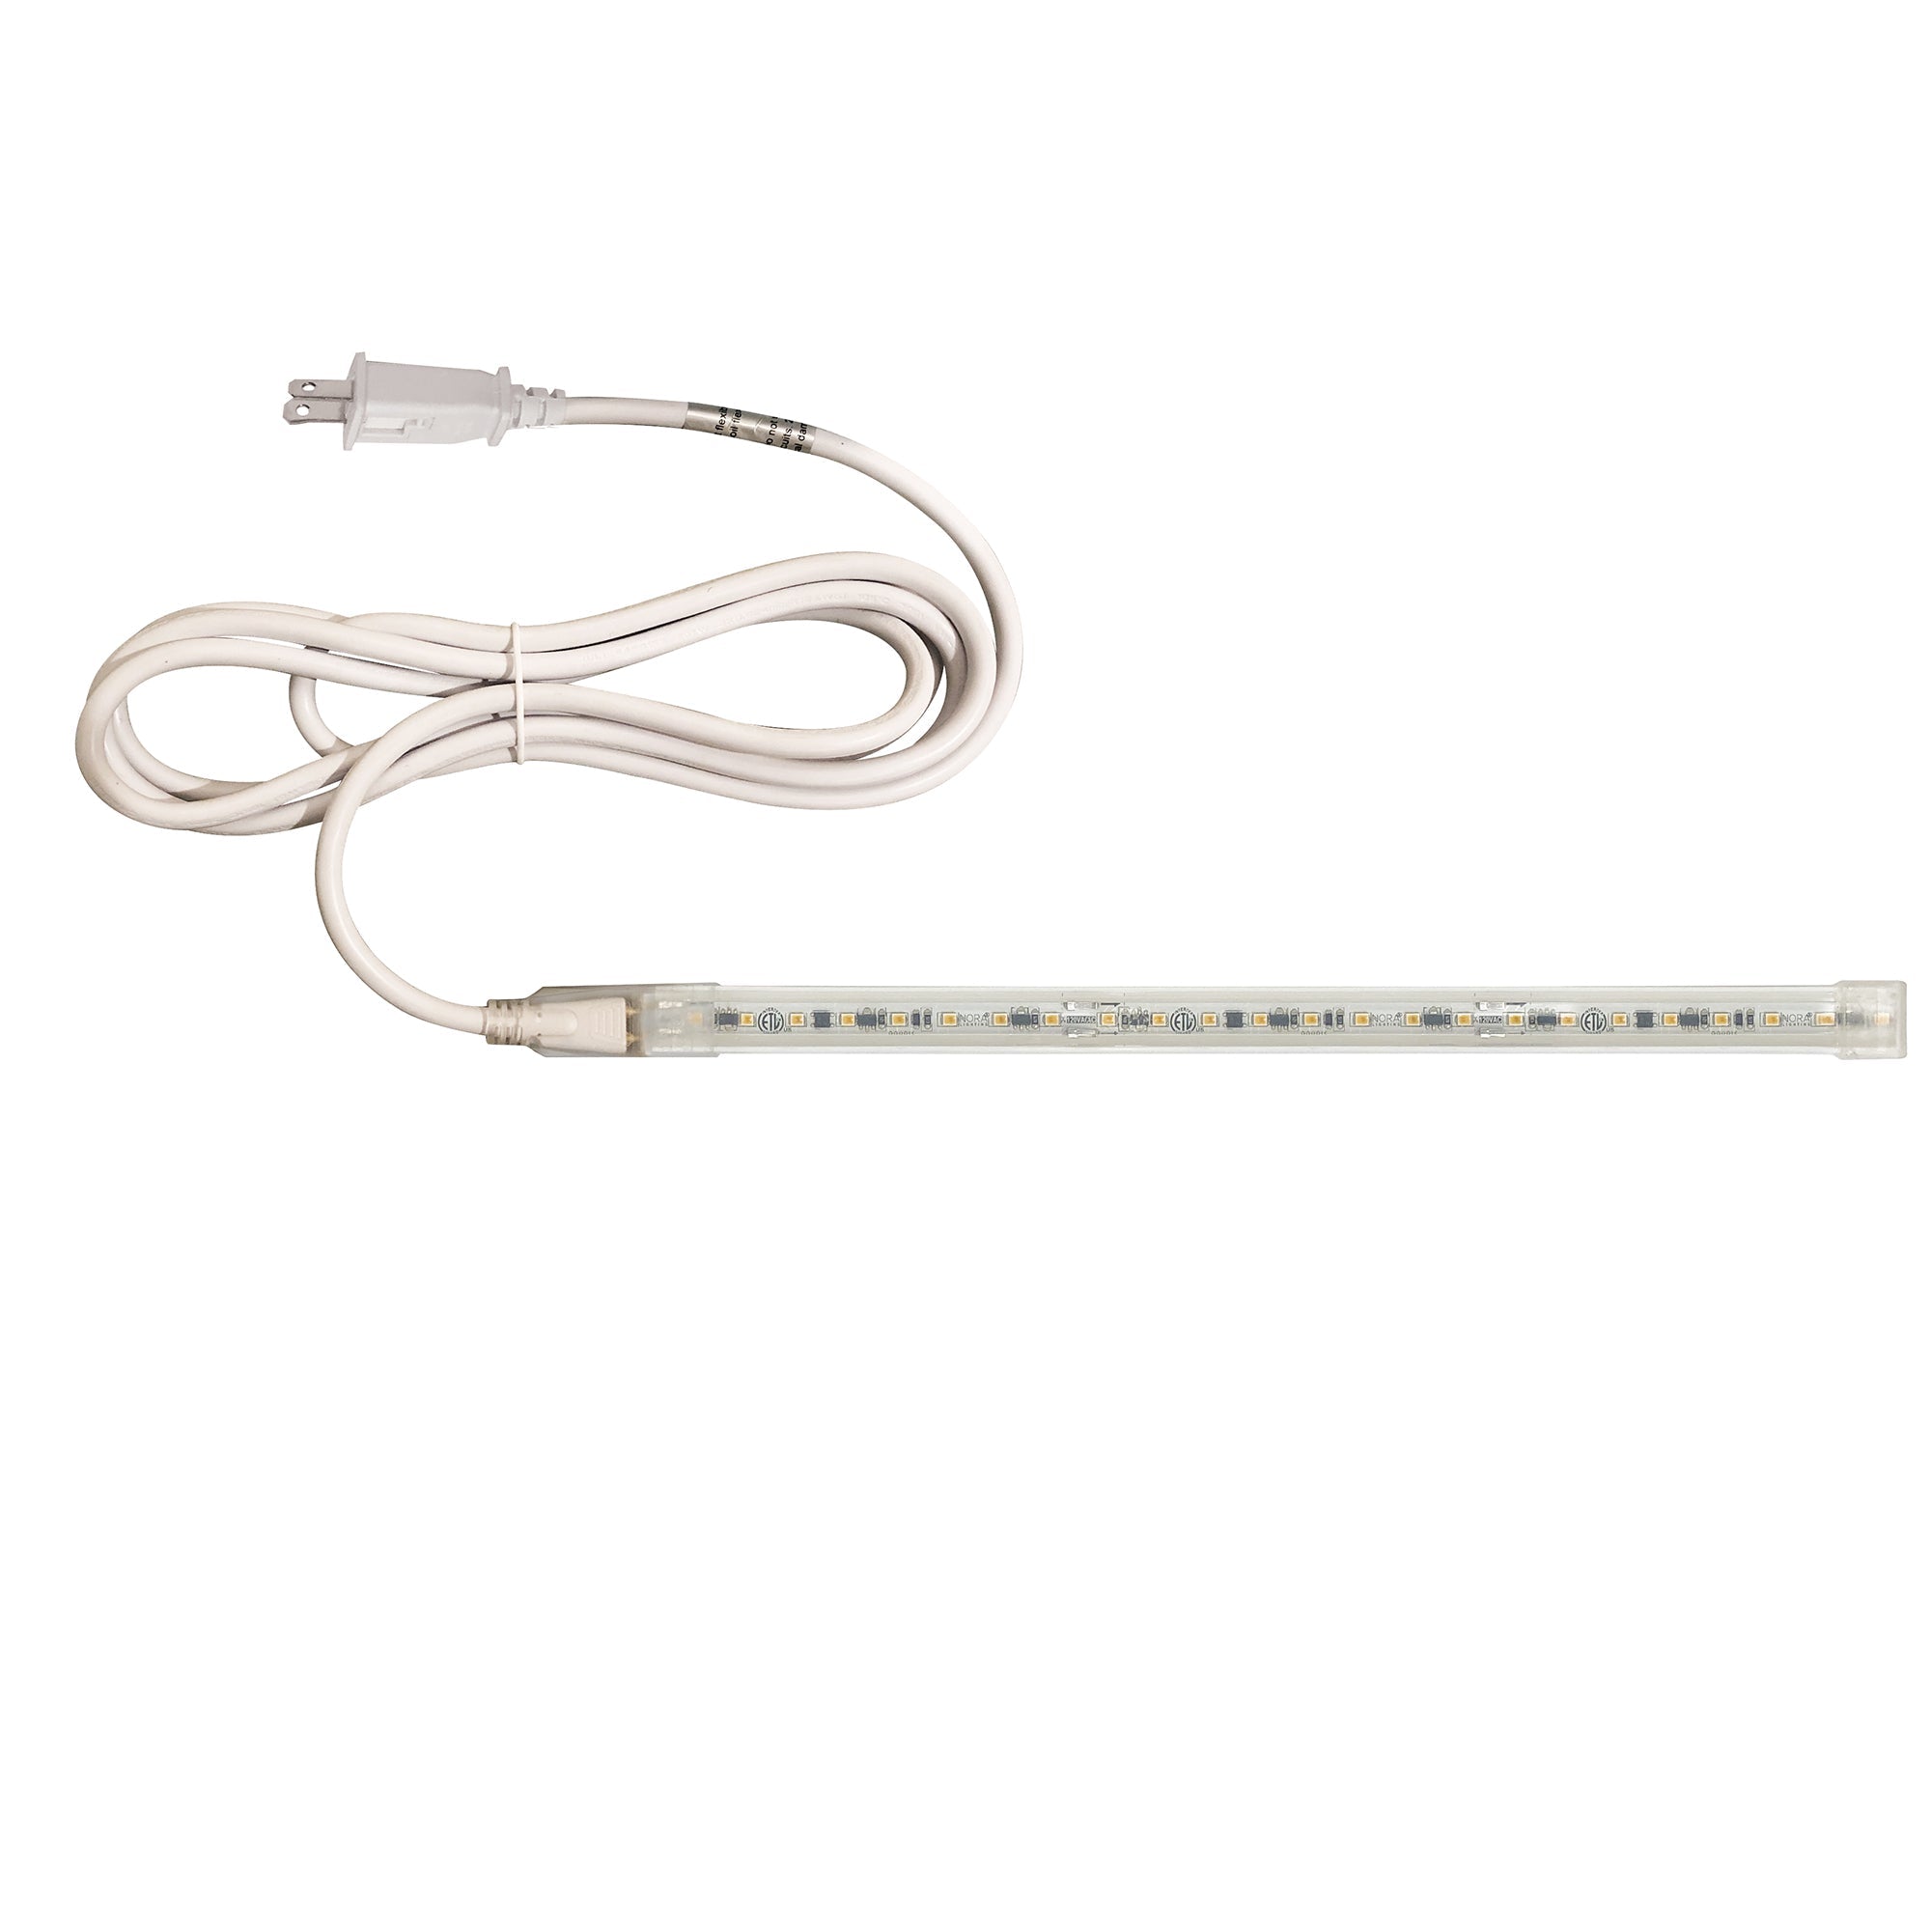 Nora Lighting NUTP13-W5-4-12-930/CP - Accent / Undercabinet - Custom Cut 5-ft, 4-in 120V Continuous LED Tape Light, 330lm / 3.6W per foot, 3000K, w/ Mounting Clips and 8' Cord & Plug